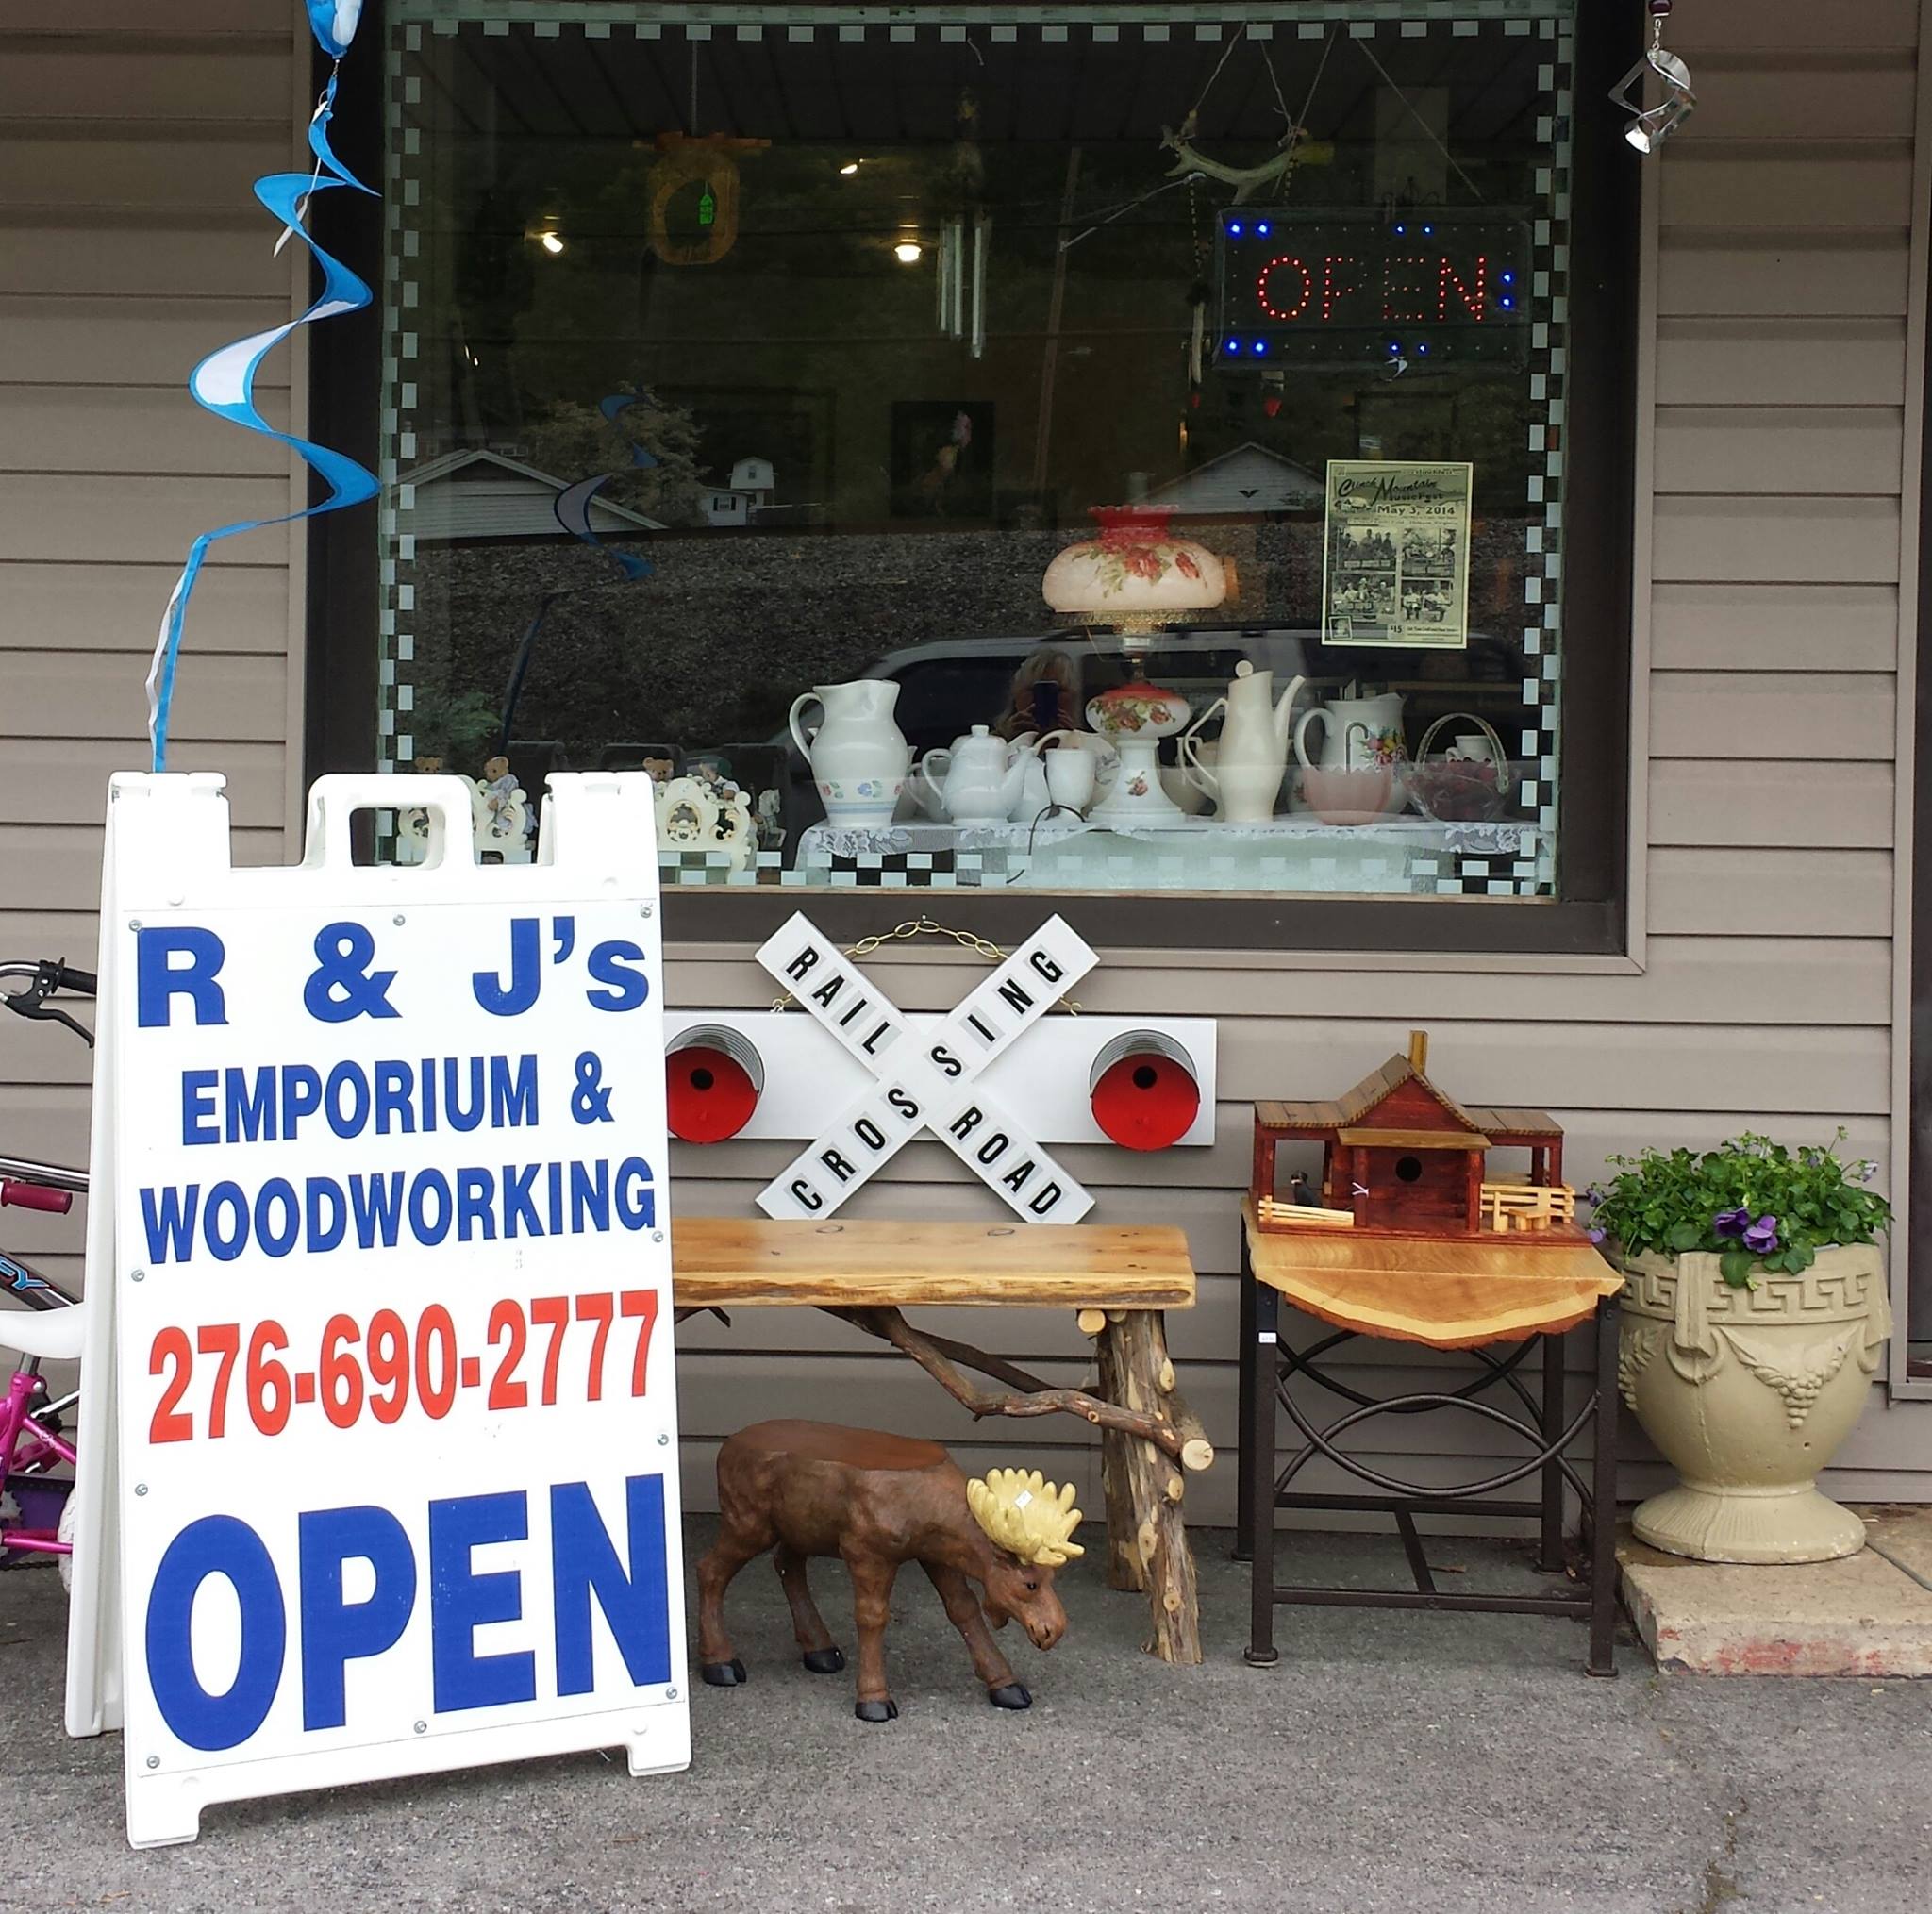 The display outside of R & J's Emporium and Woodworking in Weber City, Virginia.